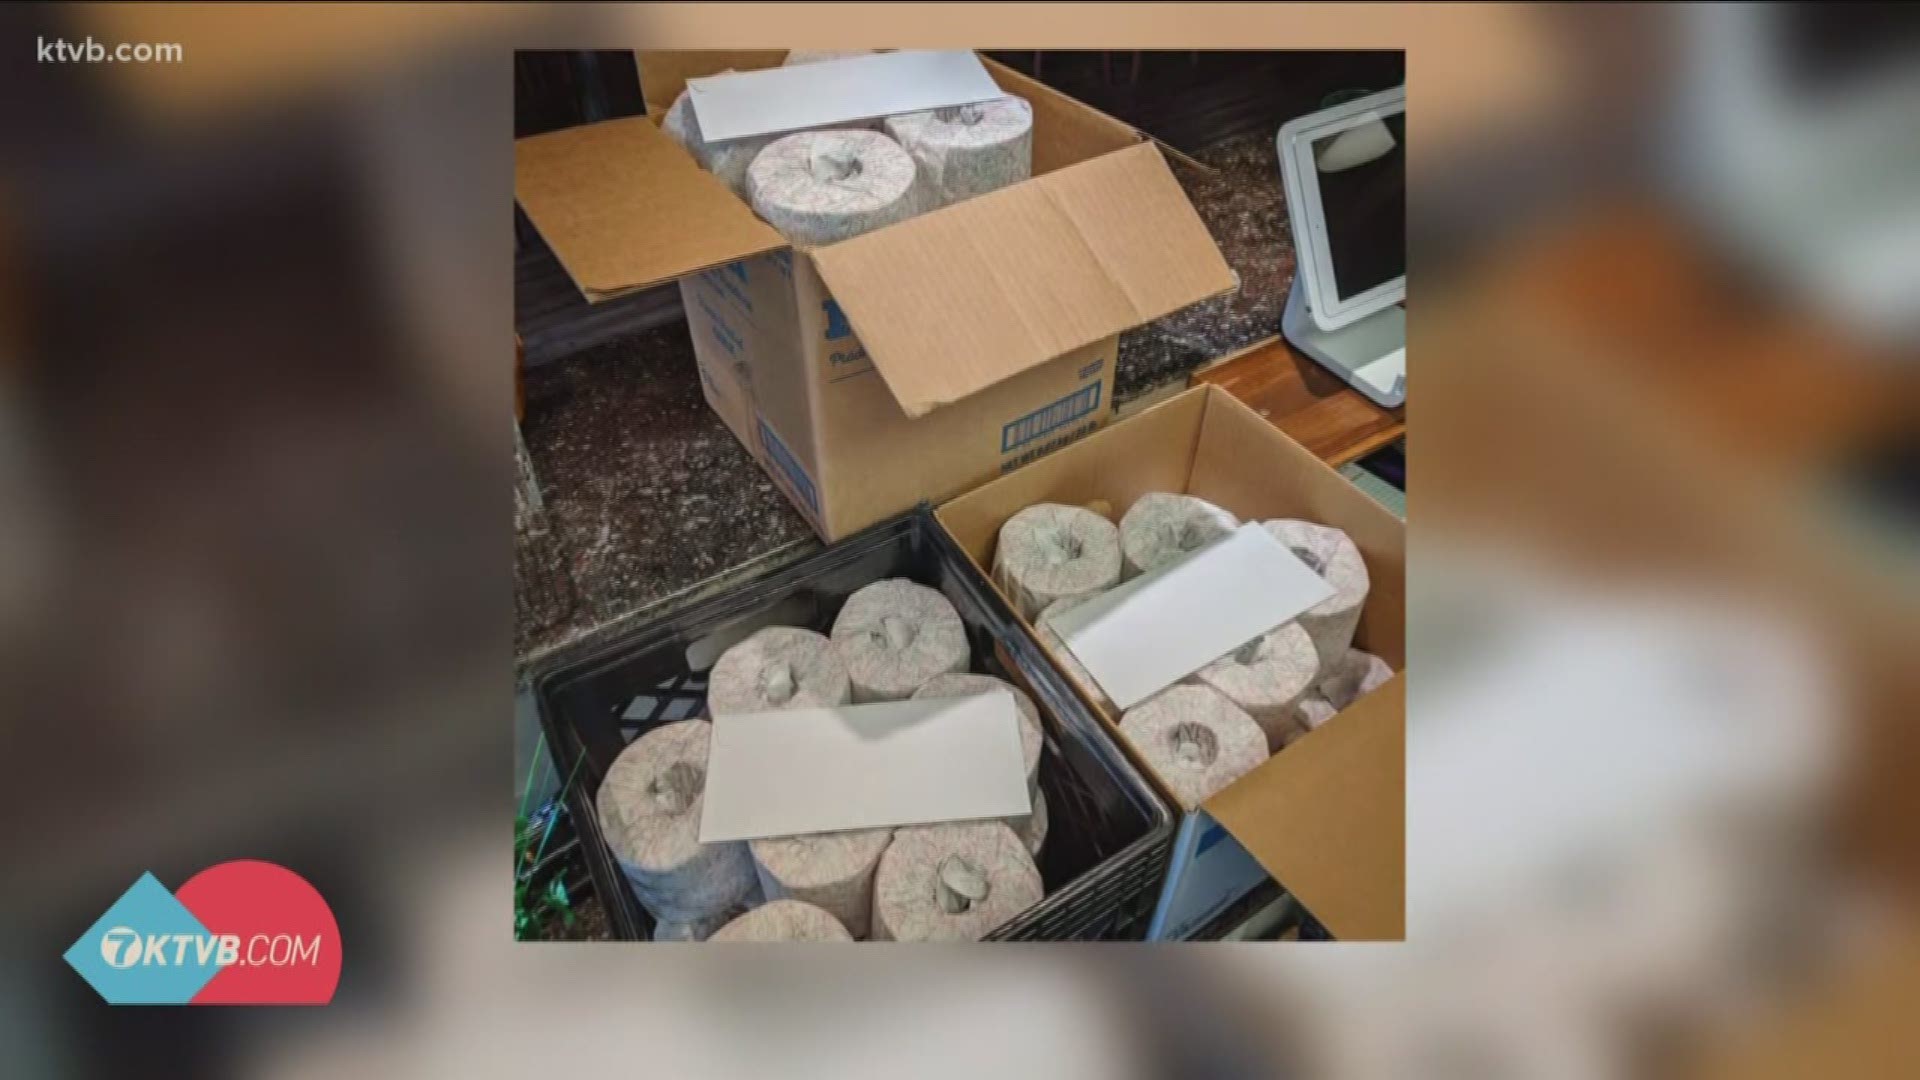 Nearly 3,300 employees at Clearwater Paper Company received 36 rolls of toilet paper and a case of paper towels as a bonus.